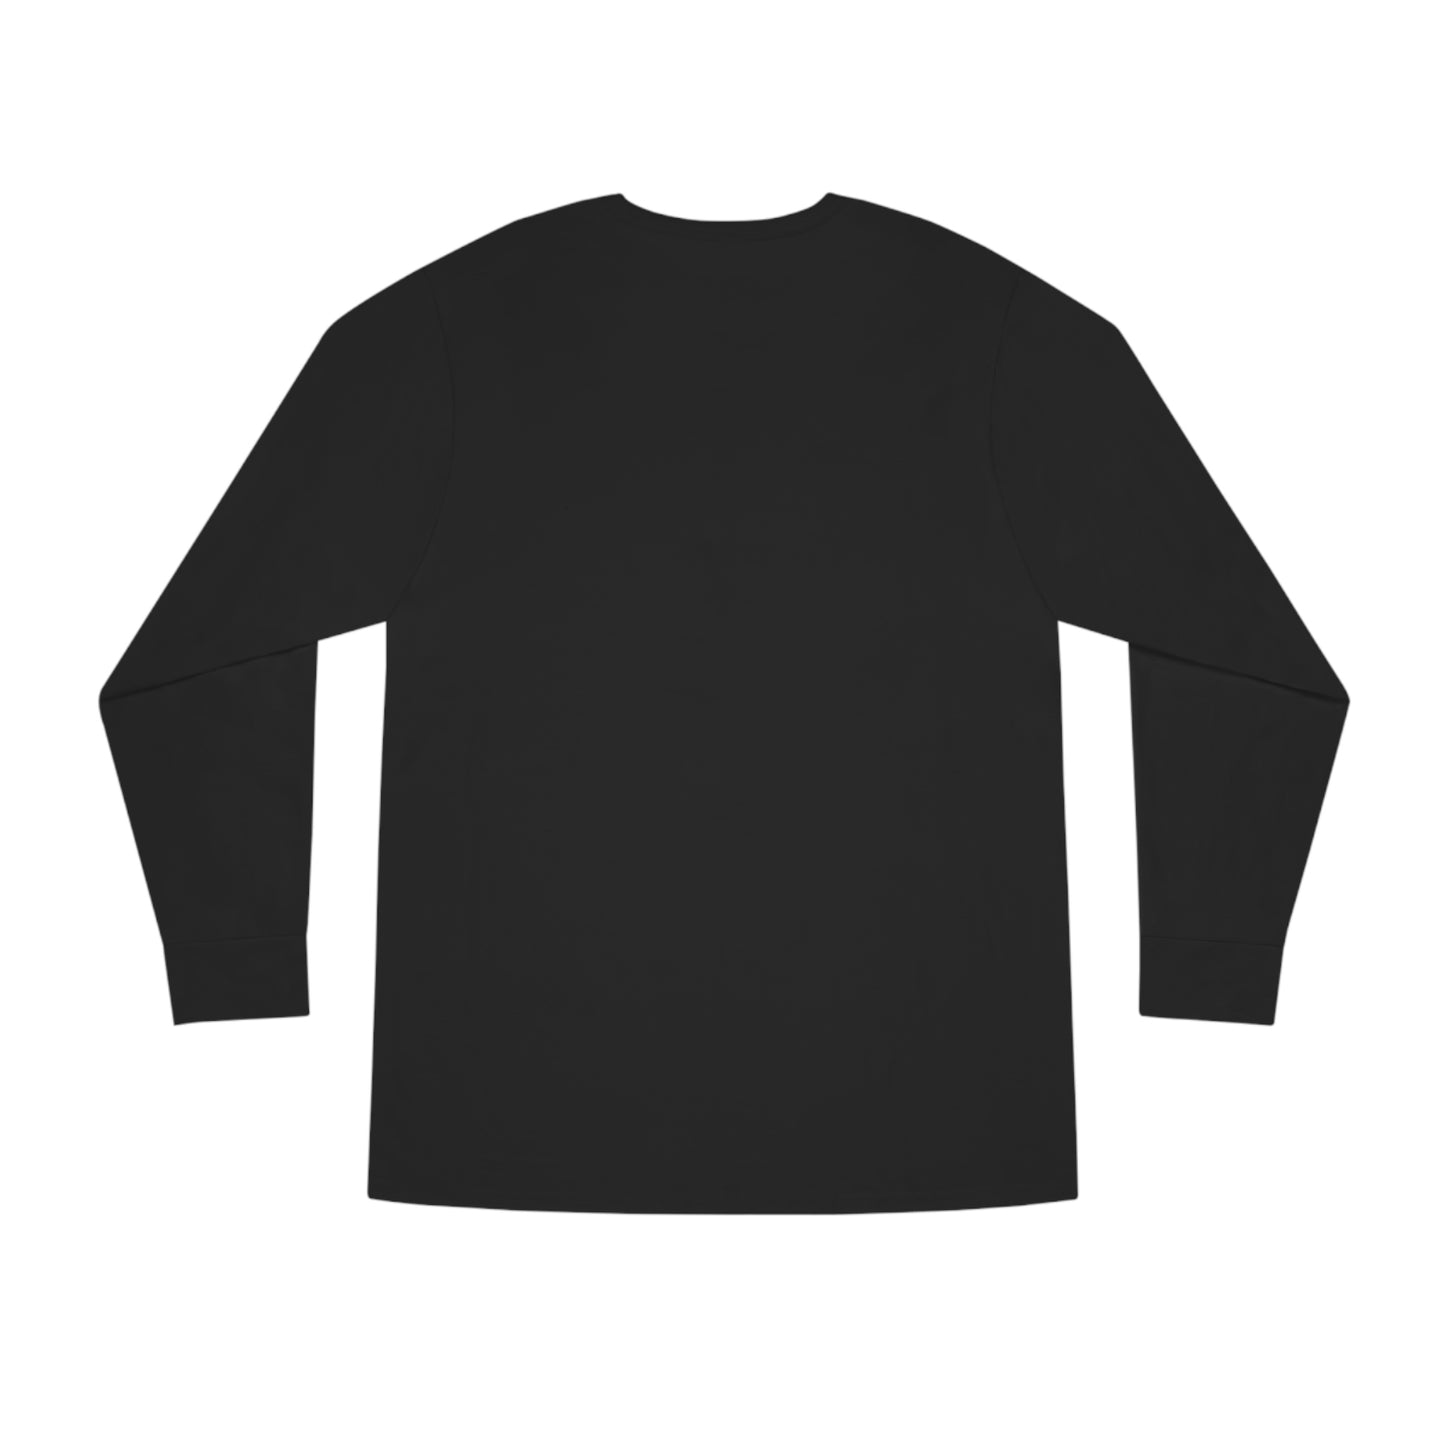 Choral Fusion Long Sleeve Crewneck Tee #C08-01F Large Front